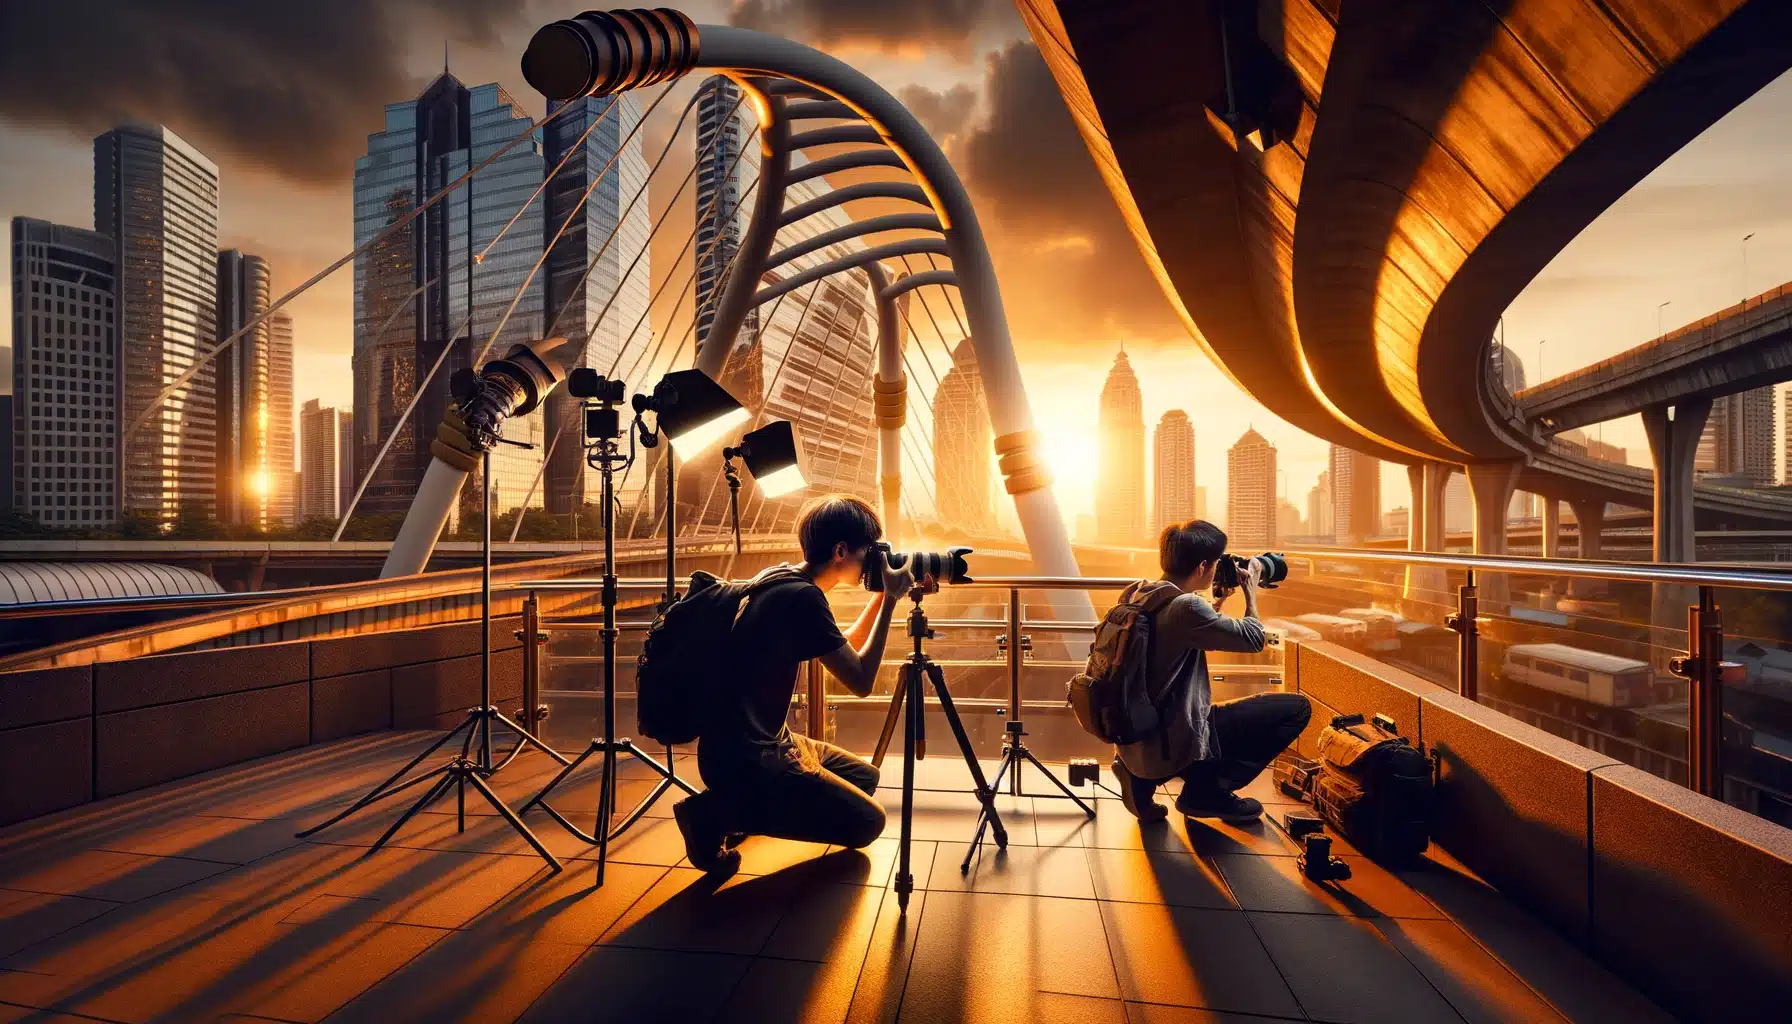 Two photographers applying tips on photography lighting to capture city buildings, showcasing advanced photography lighting tips and photo lighting strategies.